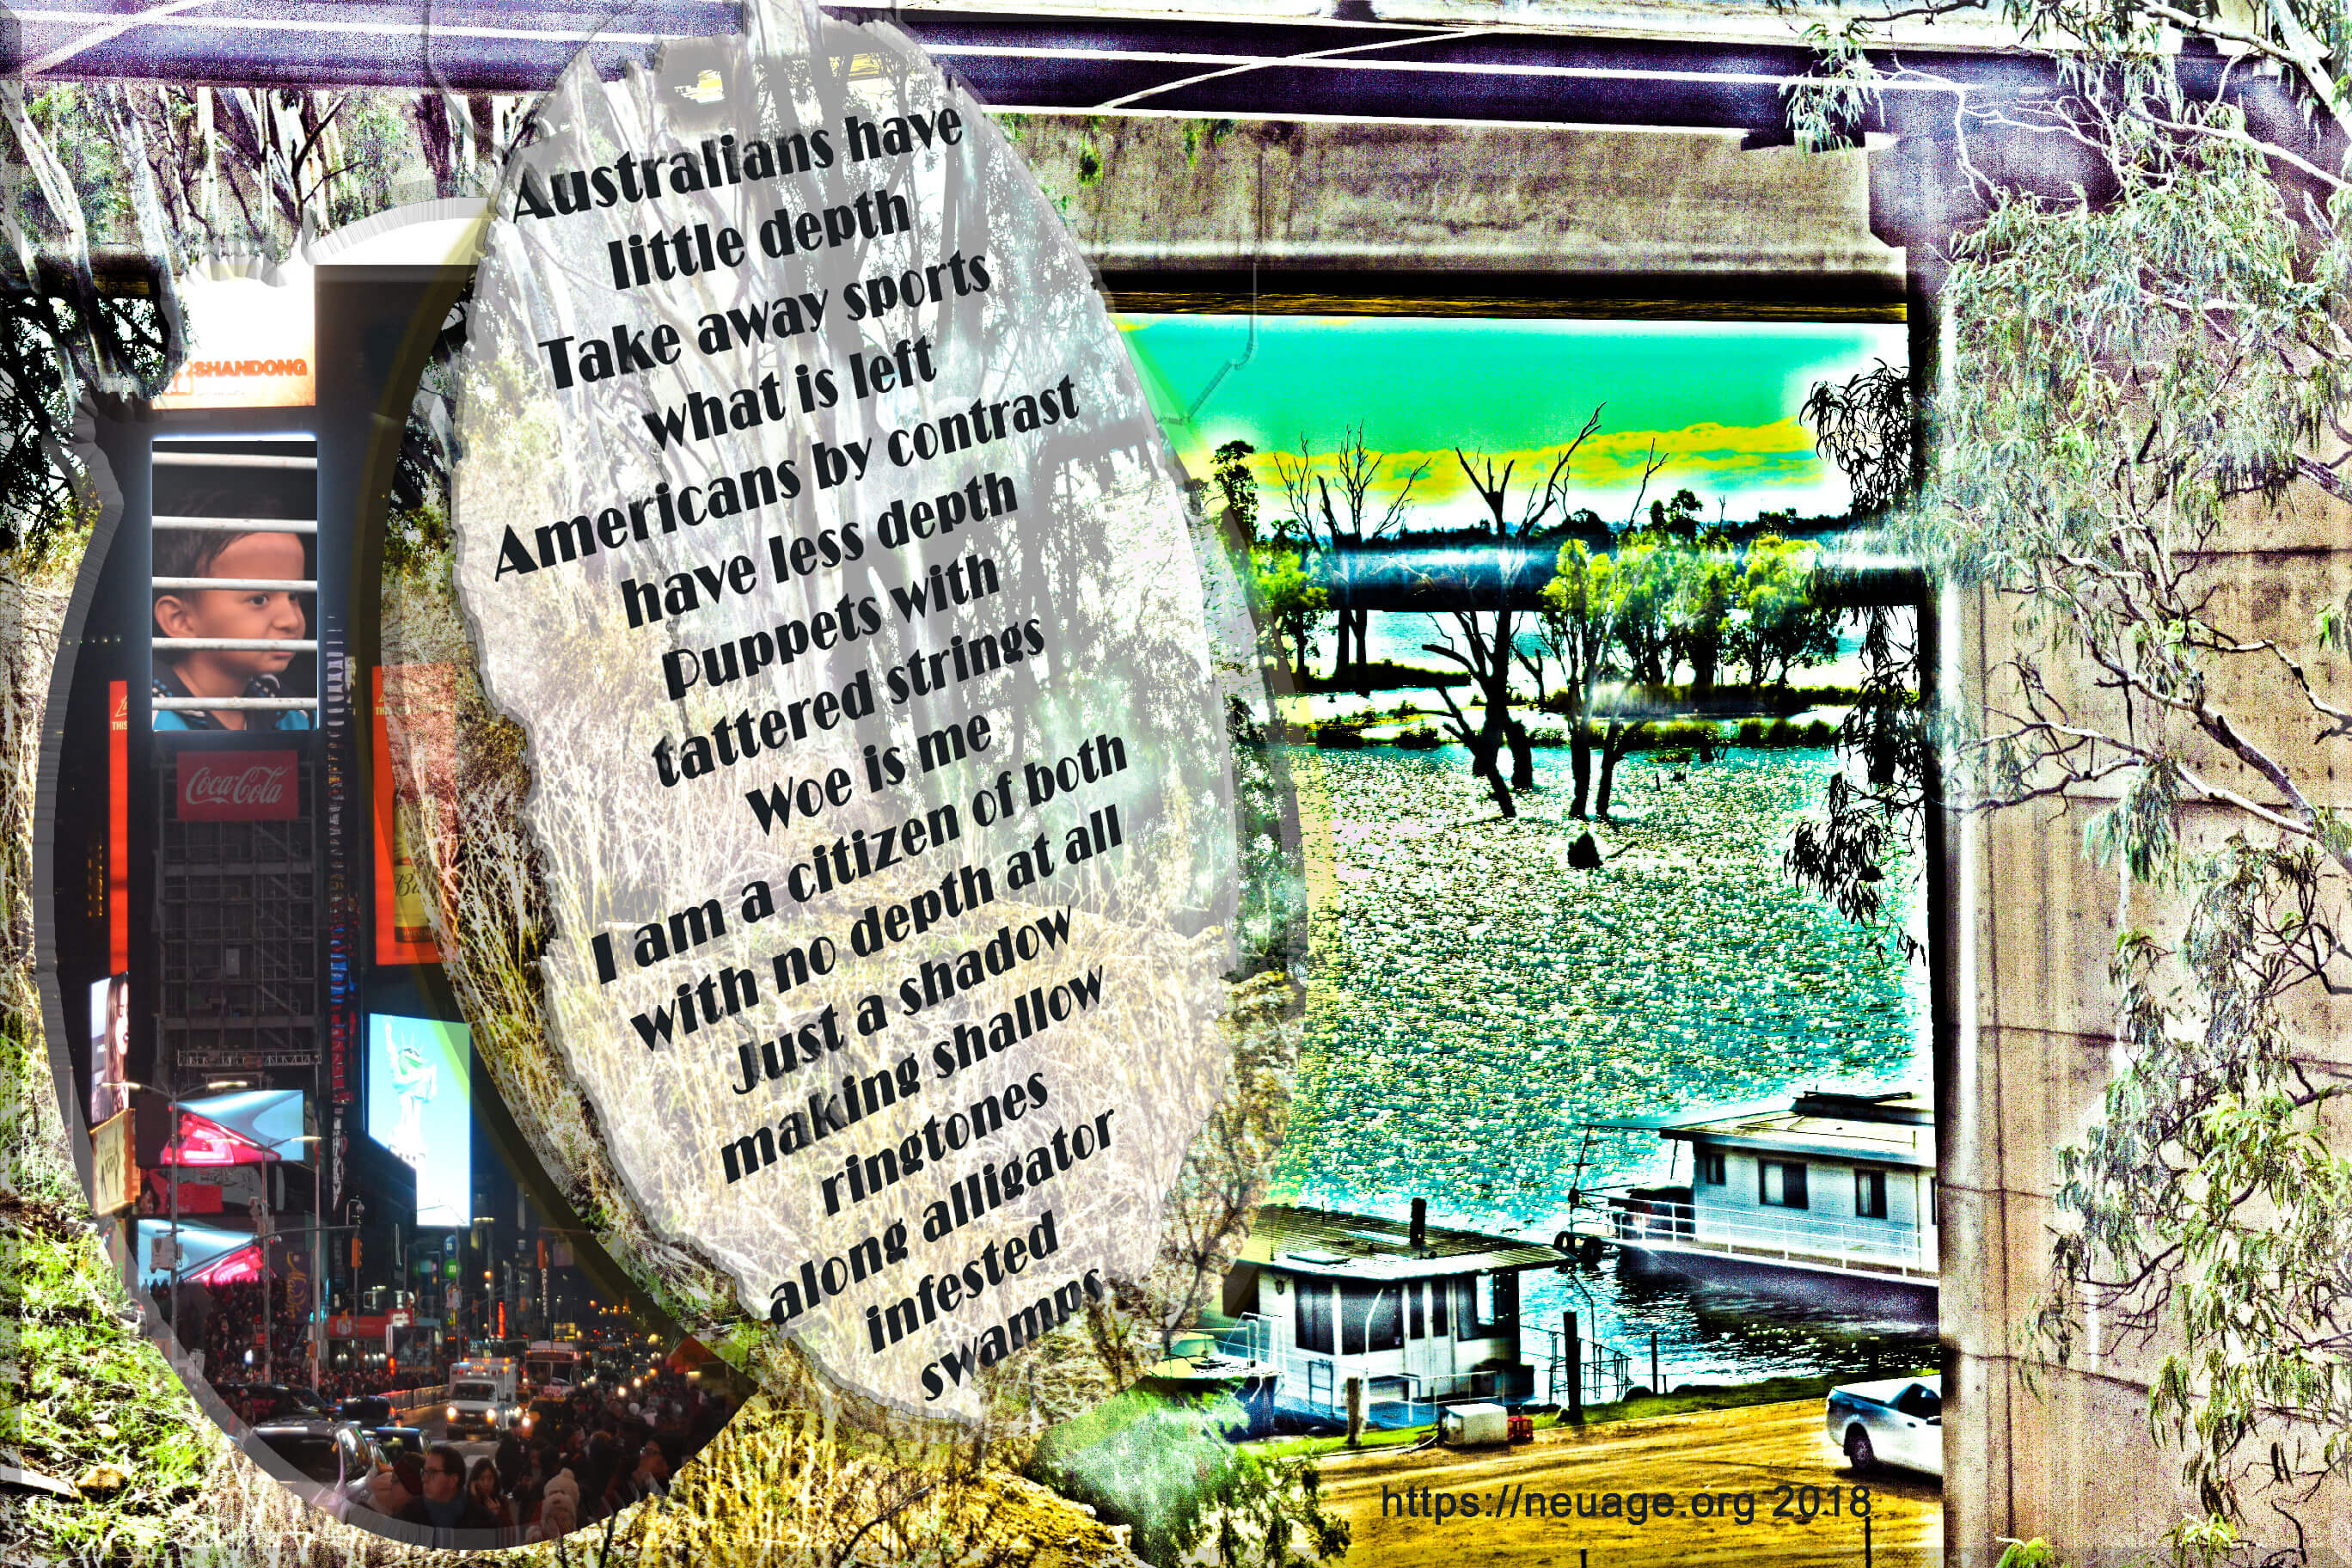 Australians have little depth
‘me too’
Fell into the river
I let them drown
What a quiet neighbourhood 
we now have

Take away sports 
what is left 
Americans by contrast have less depth
Puppets with tattered strings
Woe is me
I am a citizen of both 
with no depth at all 
Just a shadow 
making shallow ringtones 
along alligator infested swamps